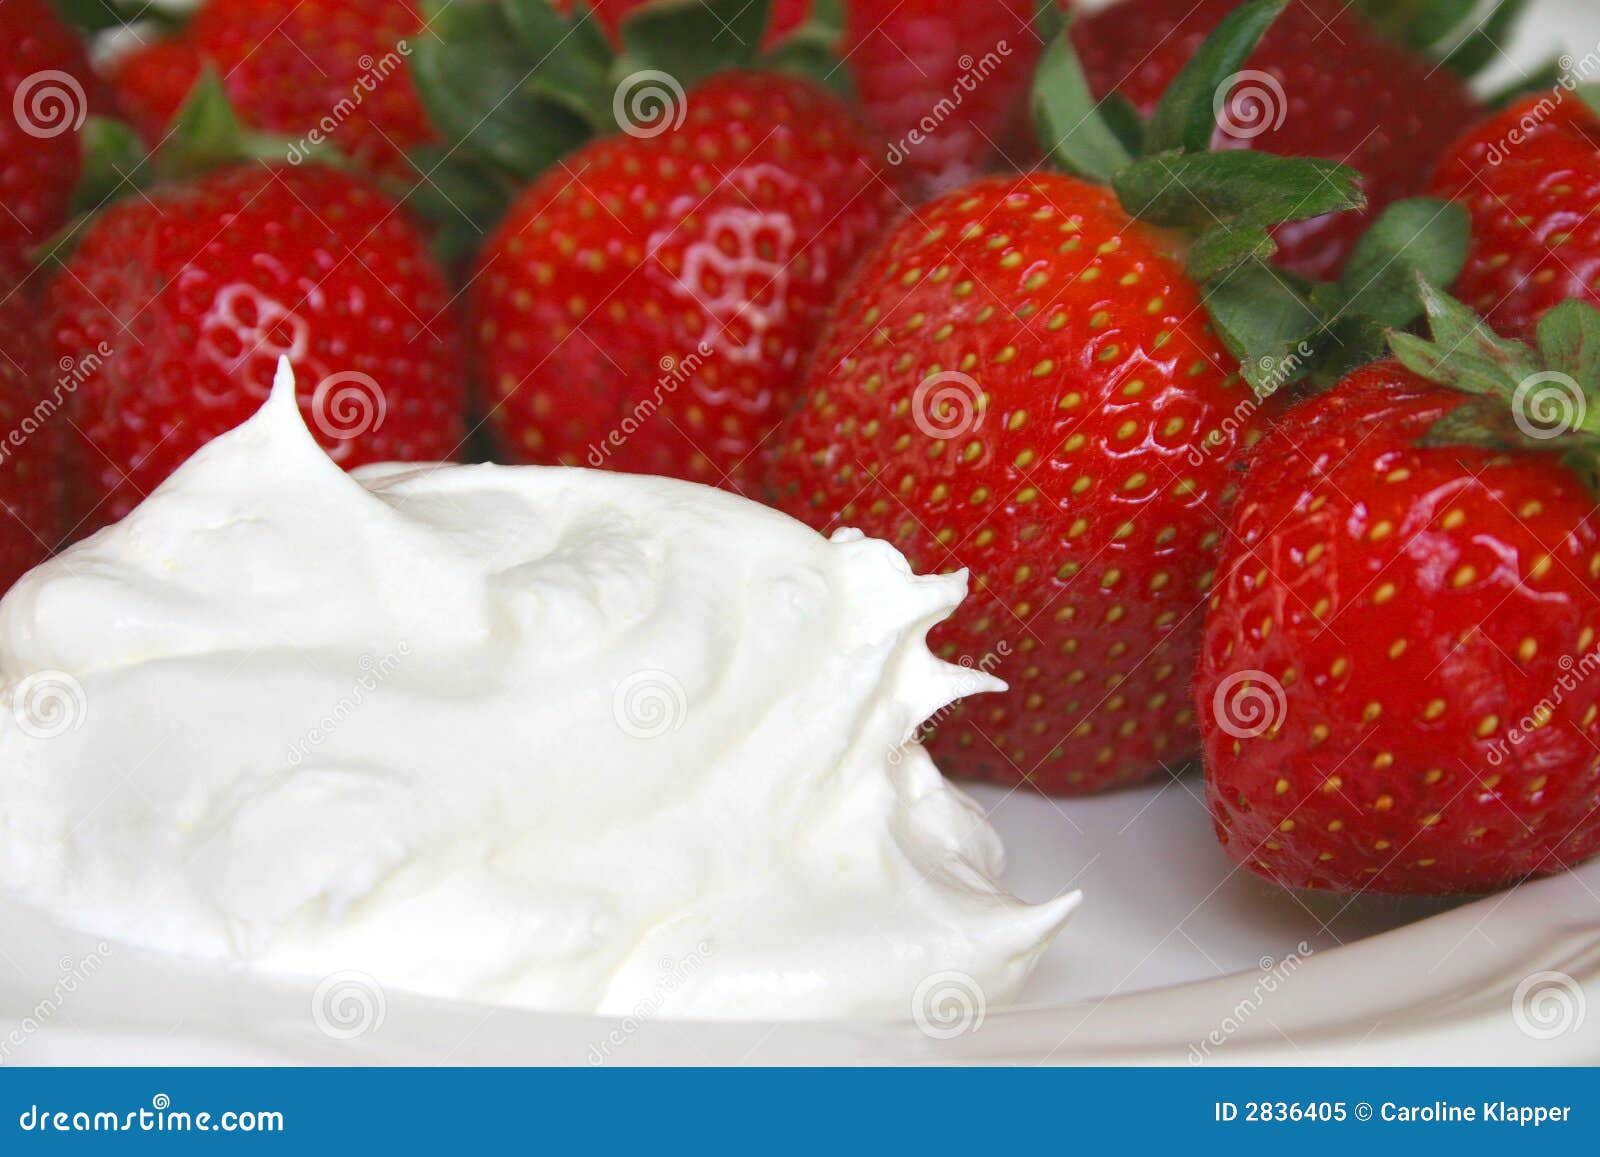 Strawberries and Whipped Cream Stock Image - Image of sweet, ripe: 2836405